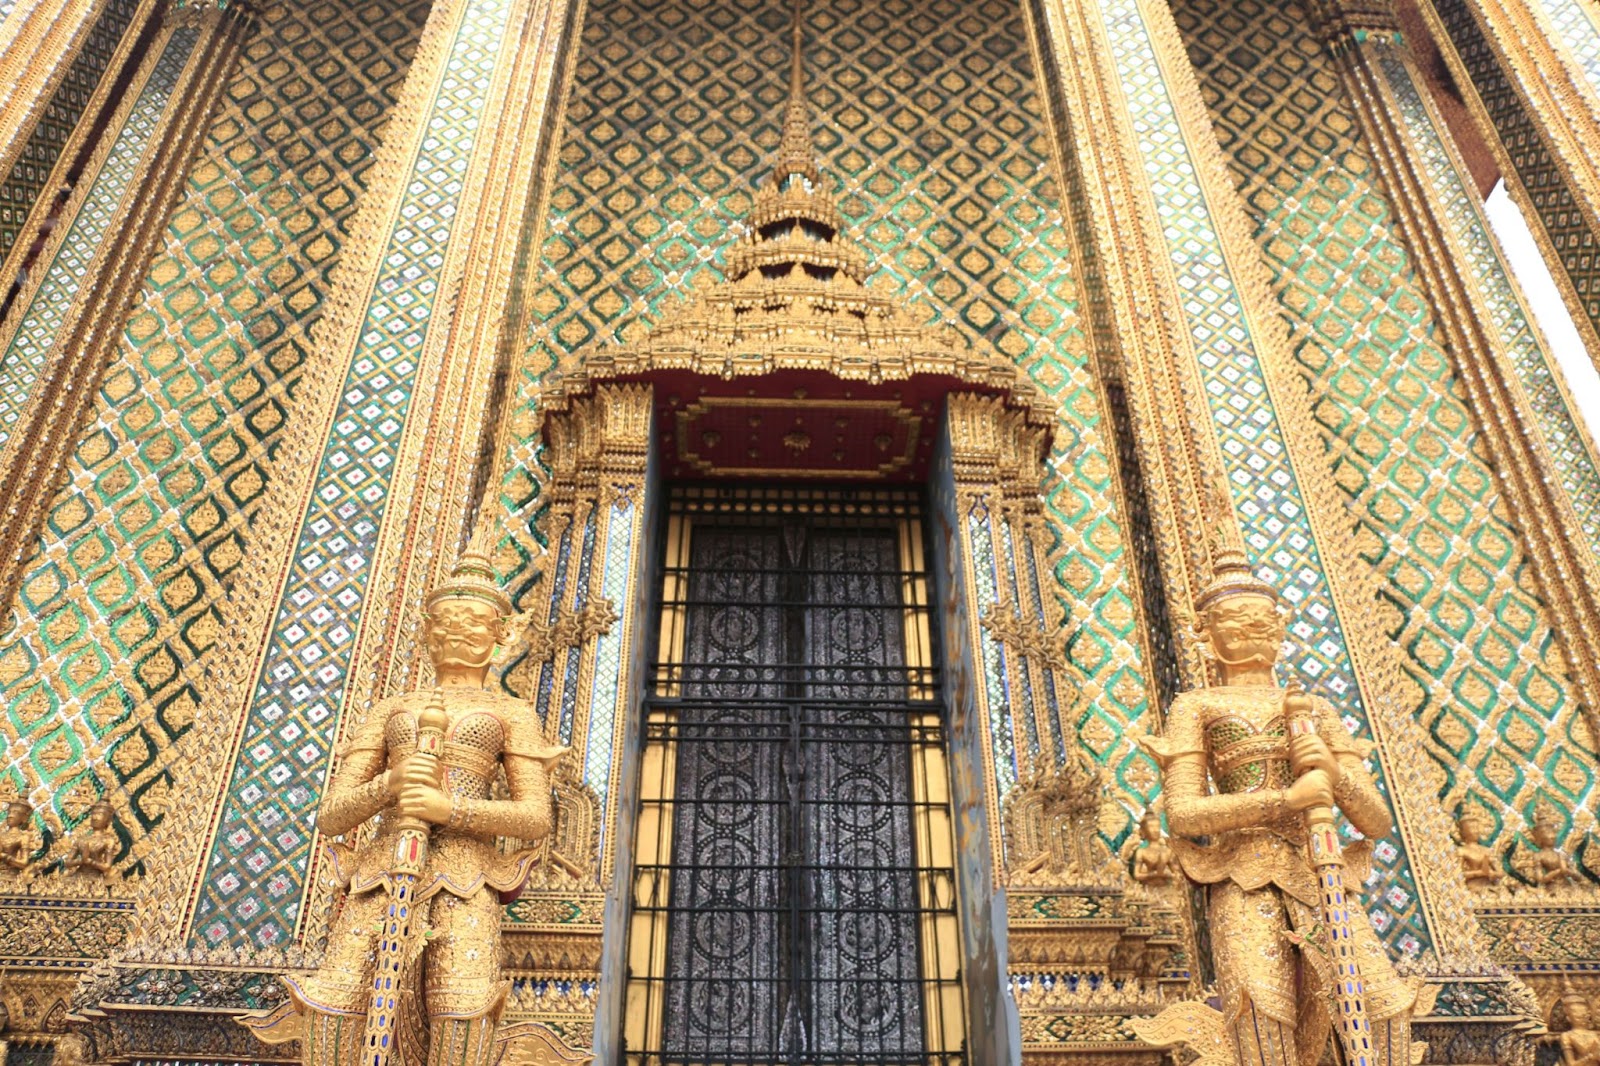 24 hours in Bangkok. This image is one of the many doors at Wat Phra Kaew or the Temple of the Emerald Buddha. 